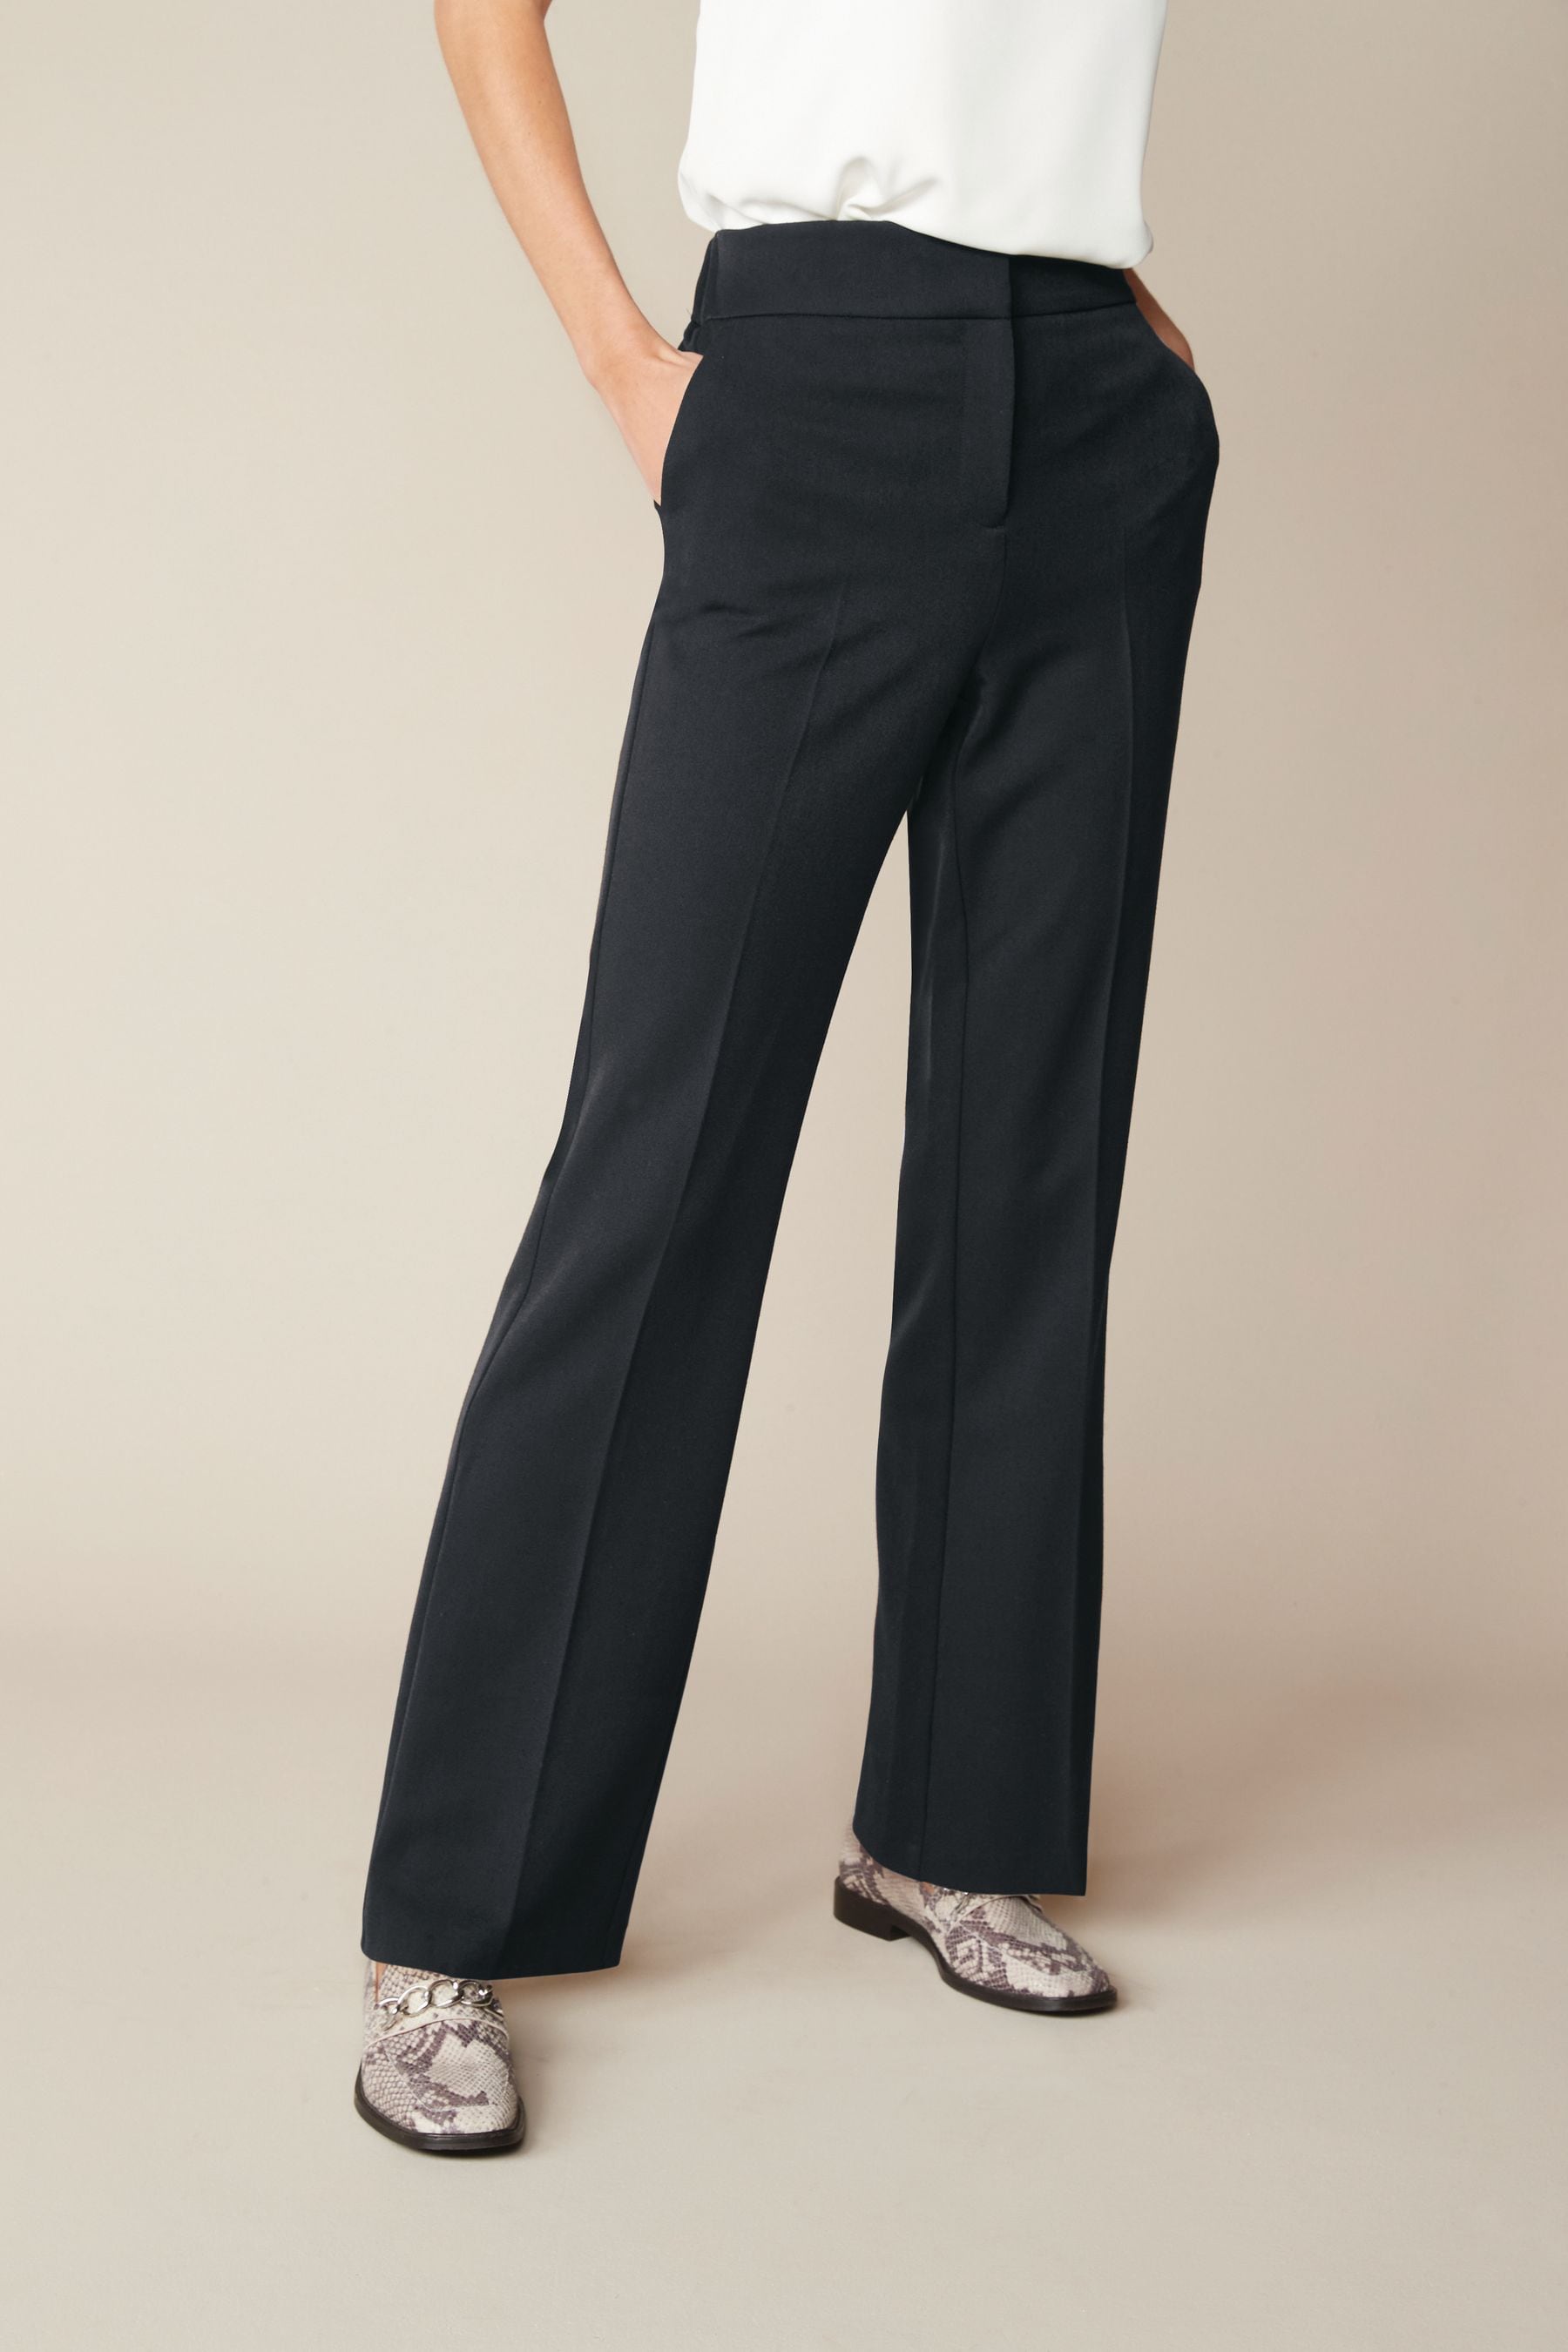 Madame Trousers and Pants  Buy Madame Black Solid Boot Cut Fit Trousers  Online  Nykaa Fashion